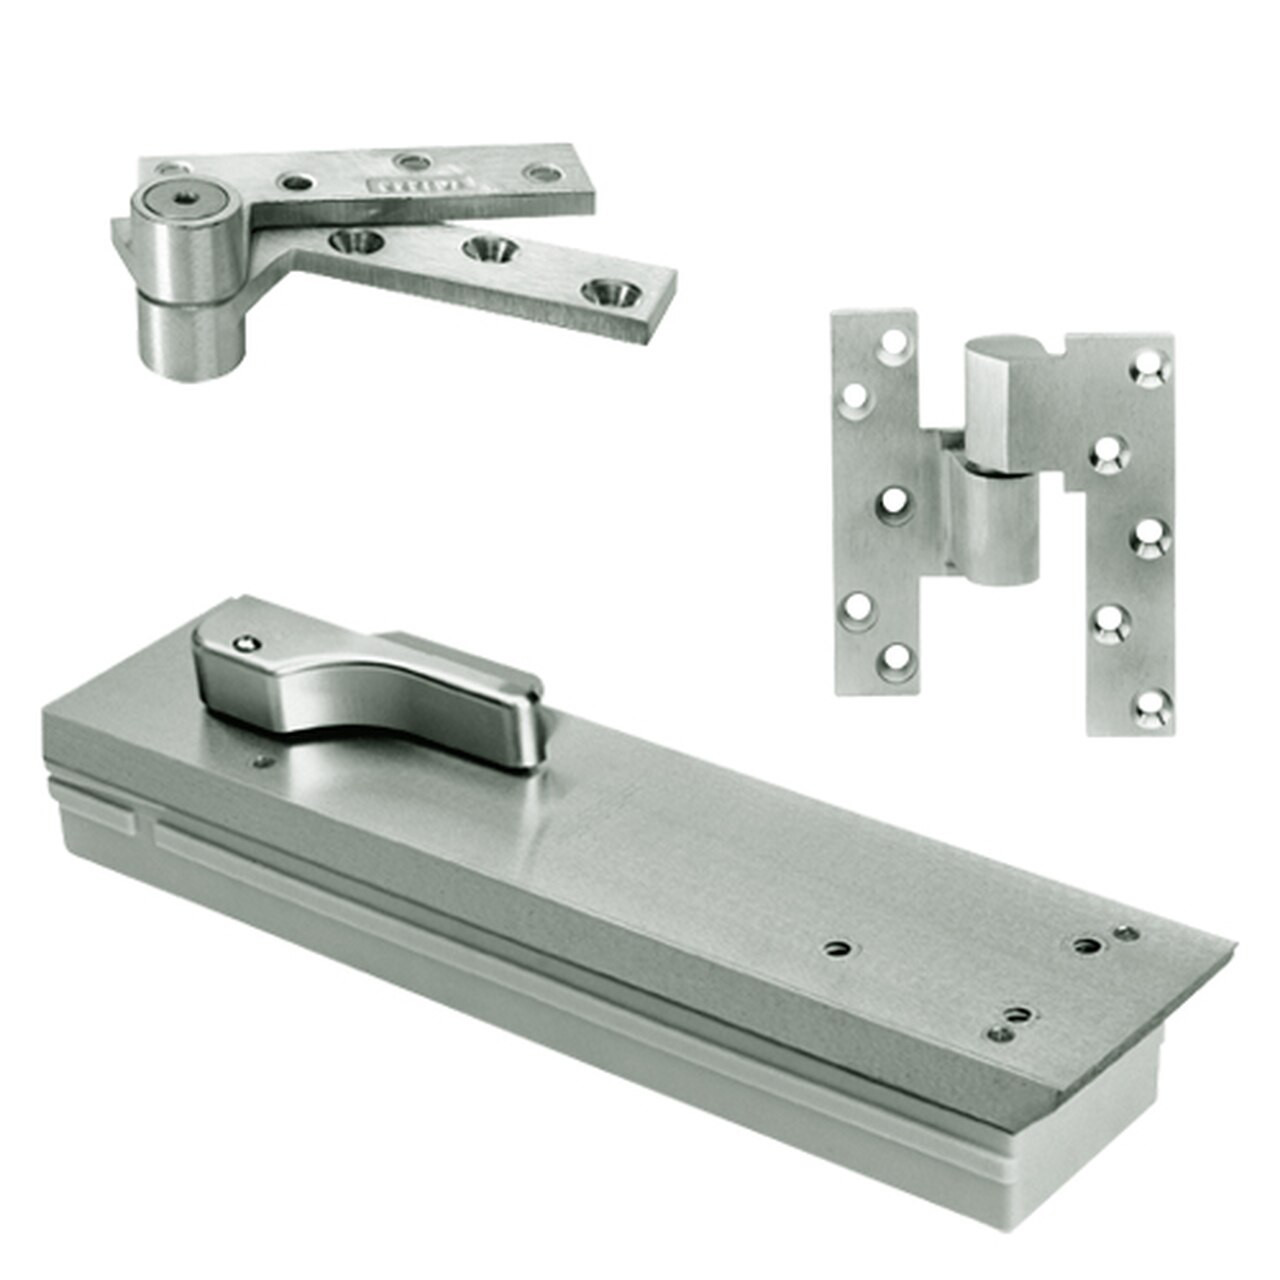 FQ5104NBC-SC-RH-619 Rixson Q51 Series Fire Rated 3/4" Offset Hung Shallow Depth Floor Closers in Satin Nickel Finish